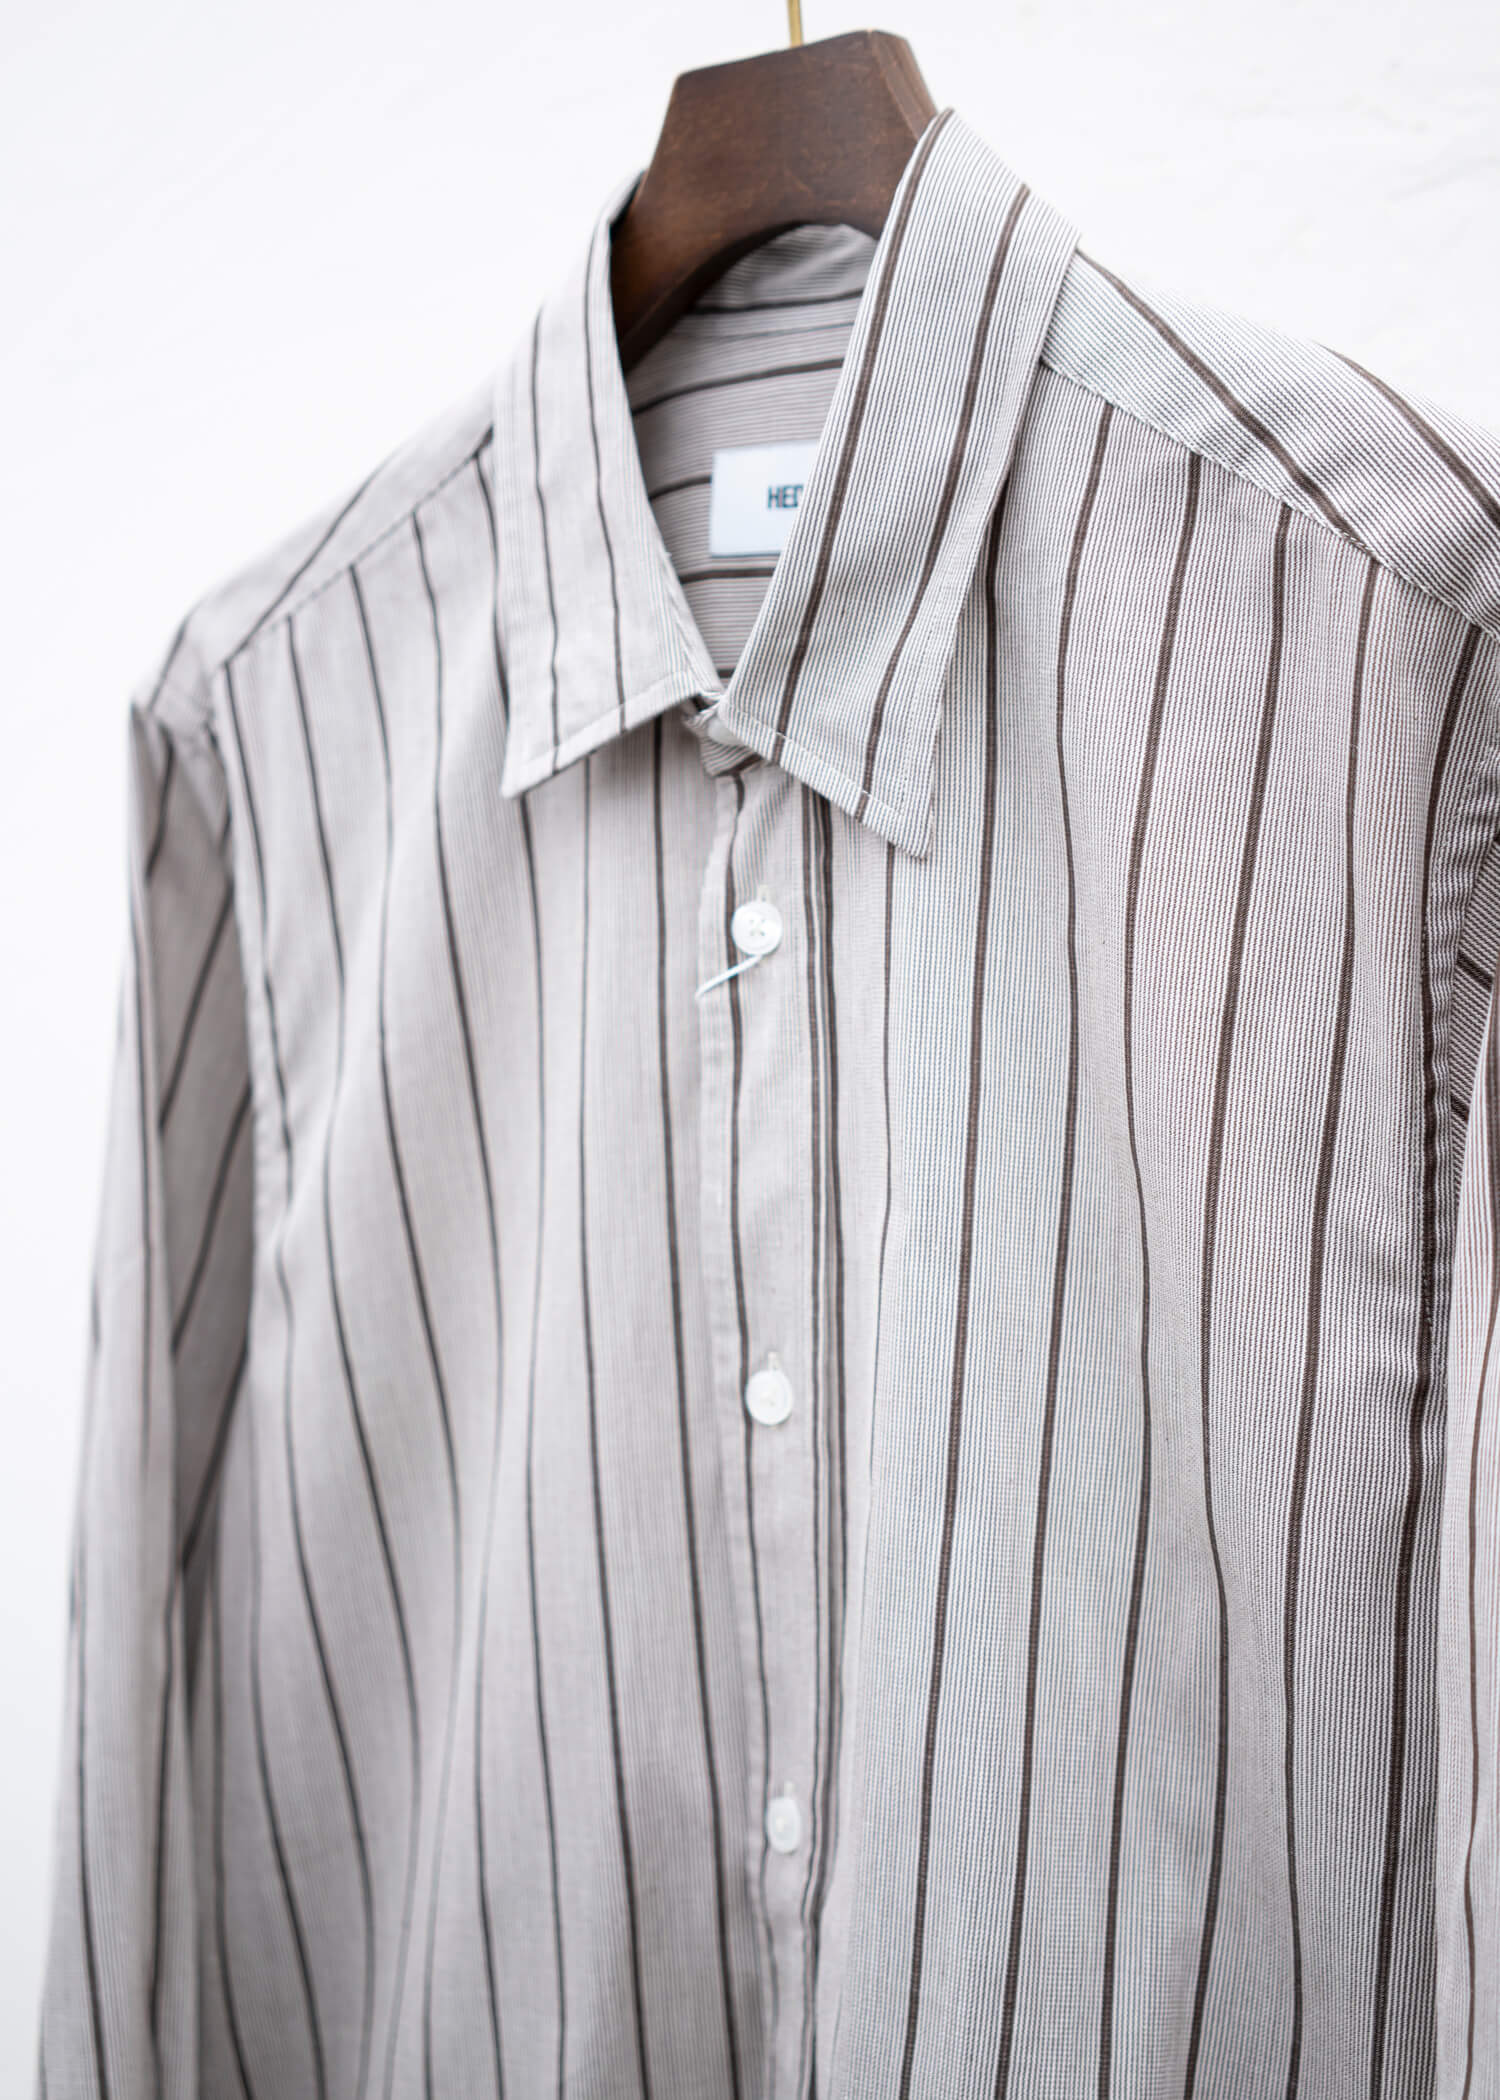 HED MAYNER BUTTONED-DOWN SHIRT BROWN PINSTRIPES